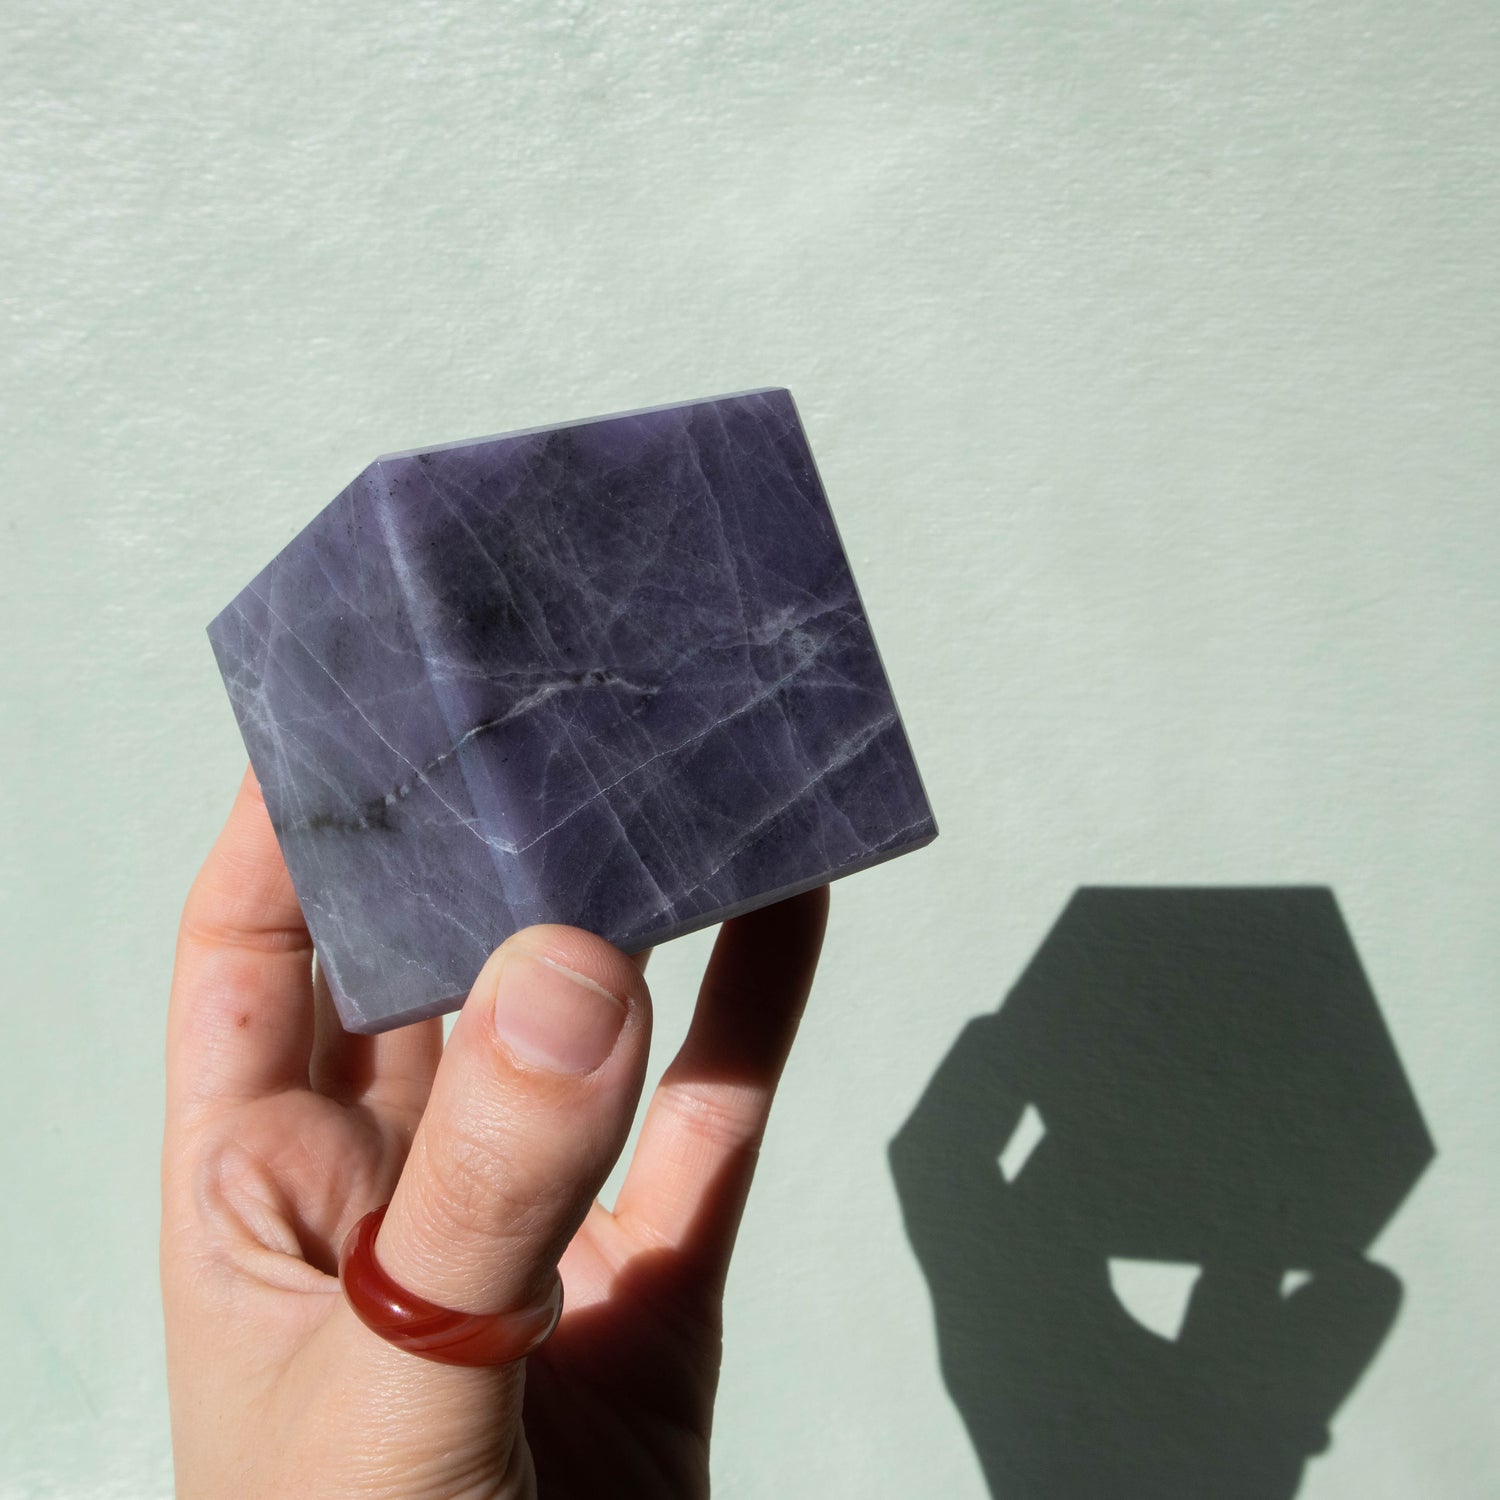 opal, purple opal, purple opal cube, crystal cube, gemstone cube, purple opal crystal, purple opal stone, purple opal properties, purple opal healing properties, purple opal metaphysical properties, purple opal meaning